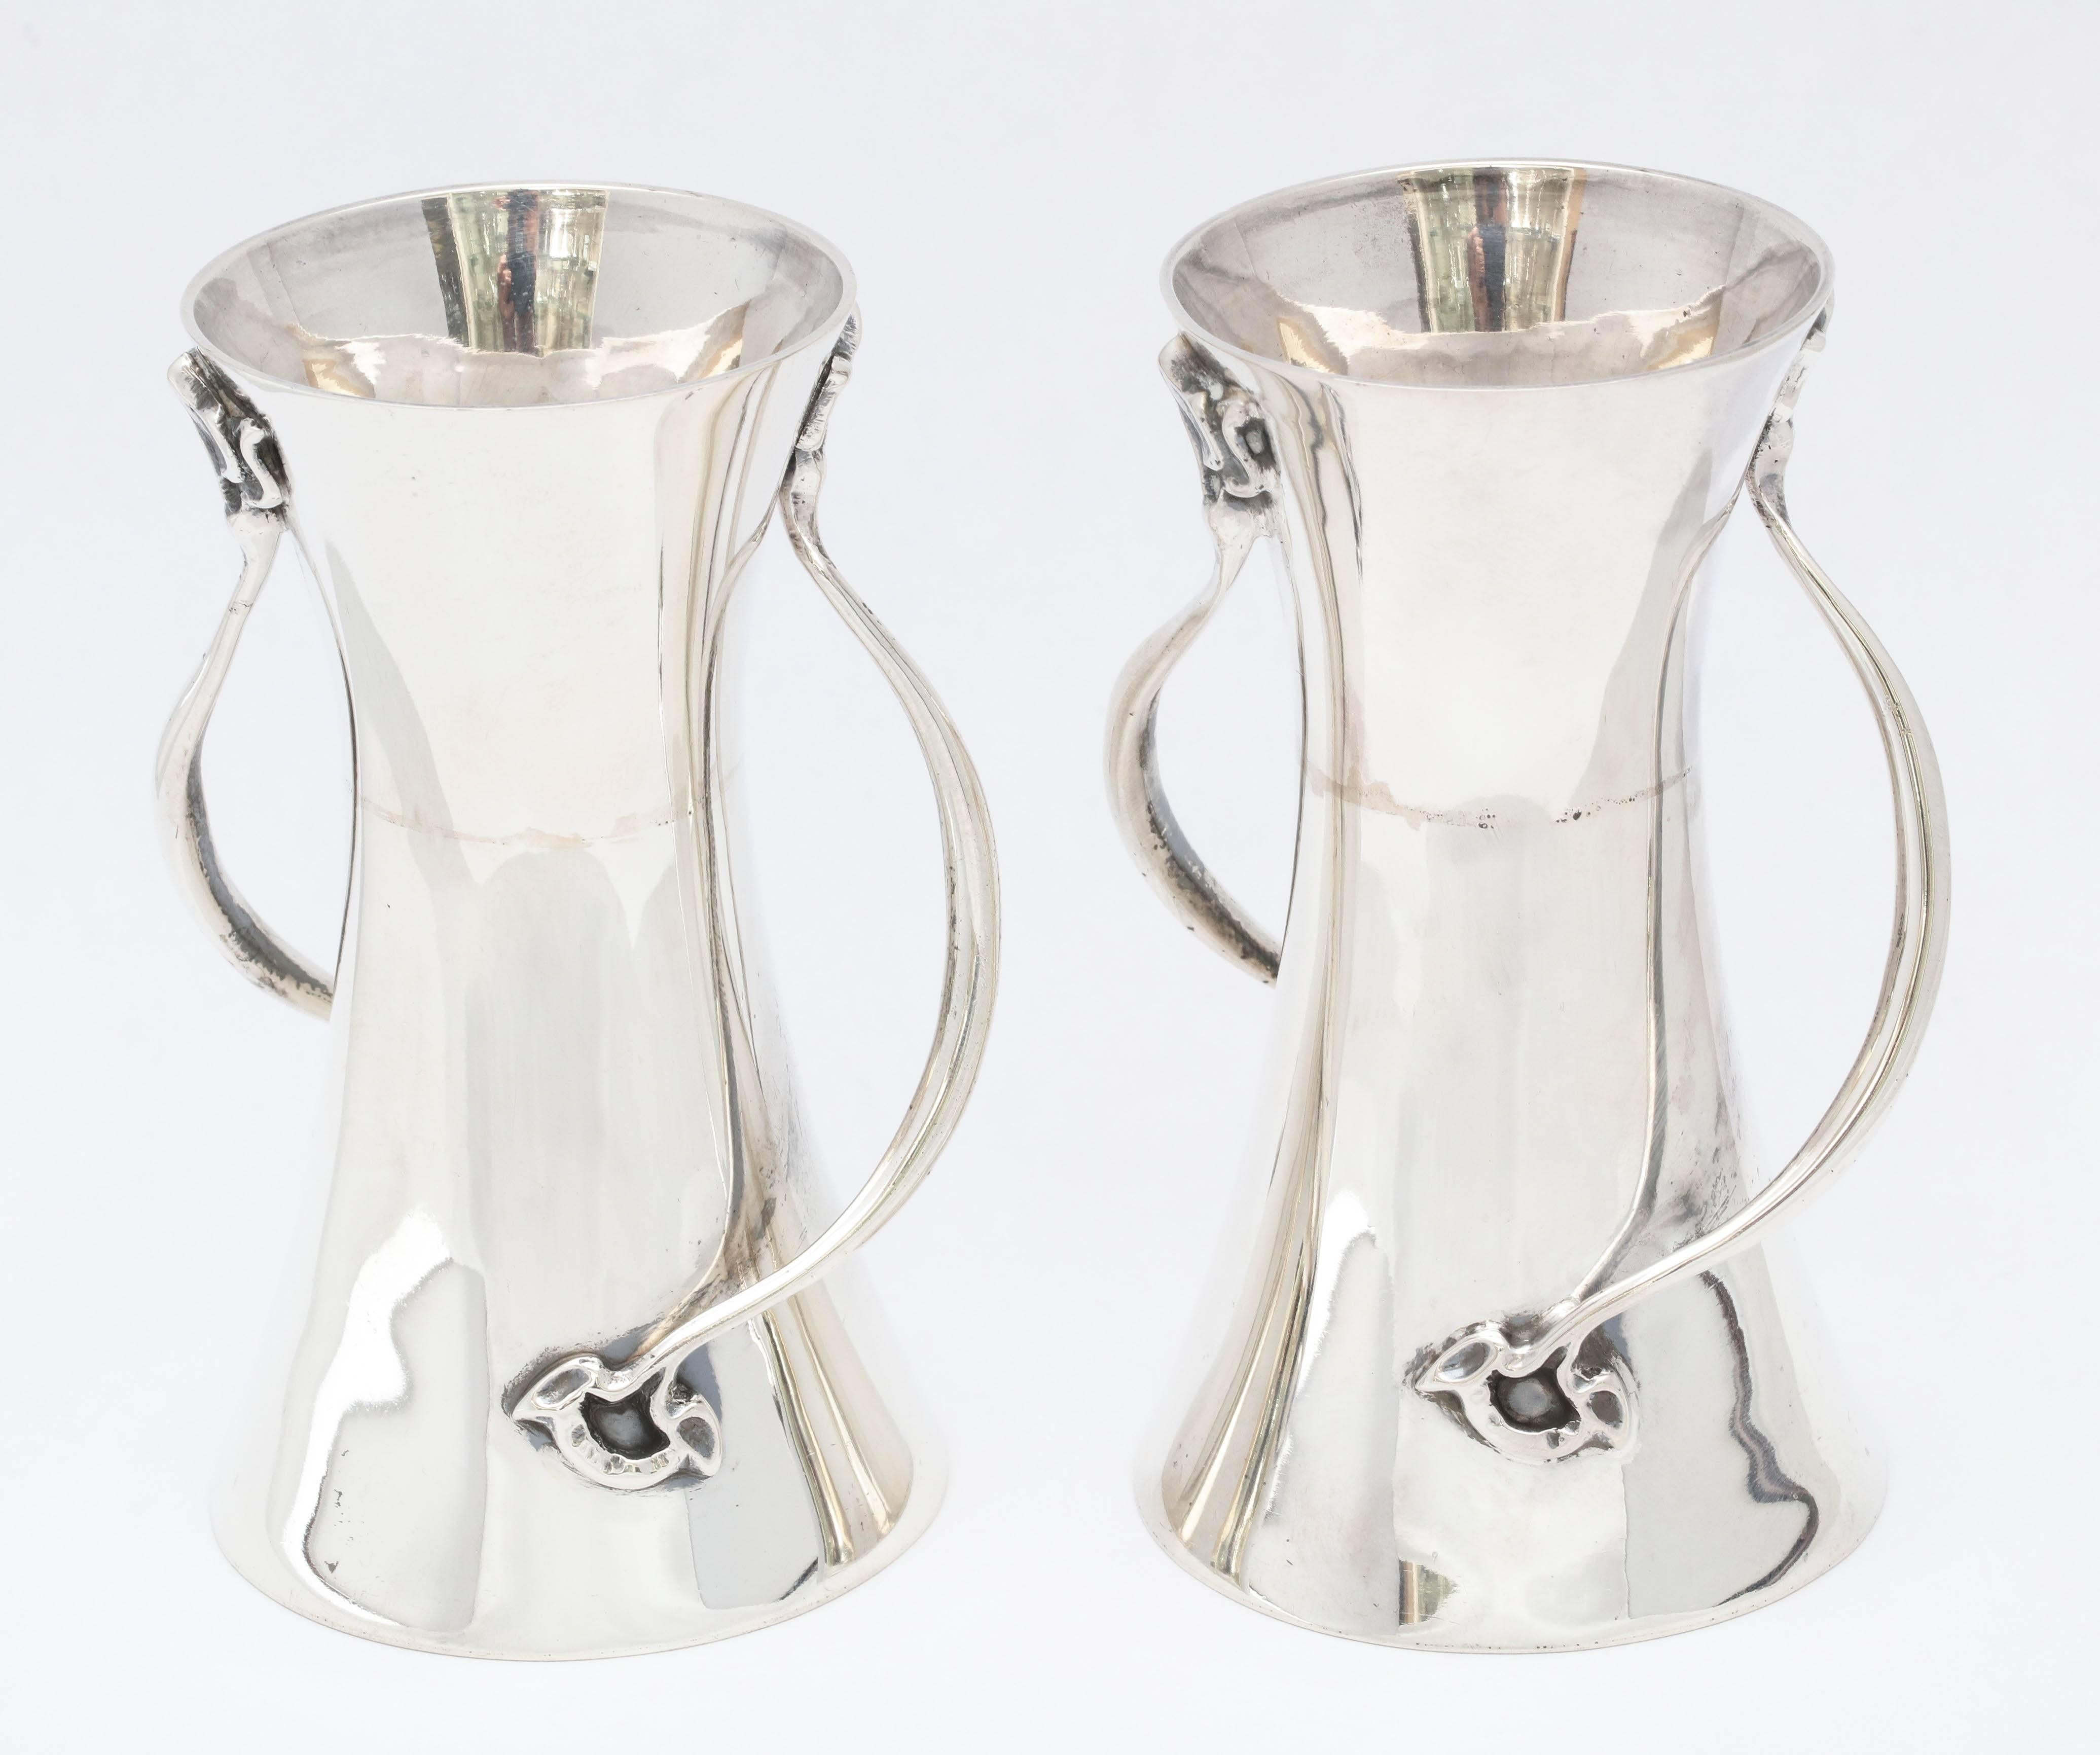 Rare pair of Art Nouveau, sterling silver bud vases, made in the city of Sheffield, England, 1906, George Wish, Ltd. - maker. Handles in the form of flower stems whip around each vase, each handle ending in a flower on the lower portion of the vase.